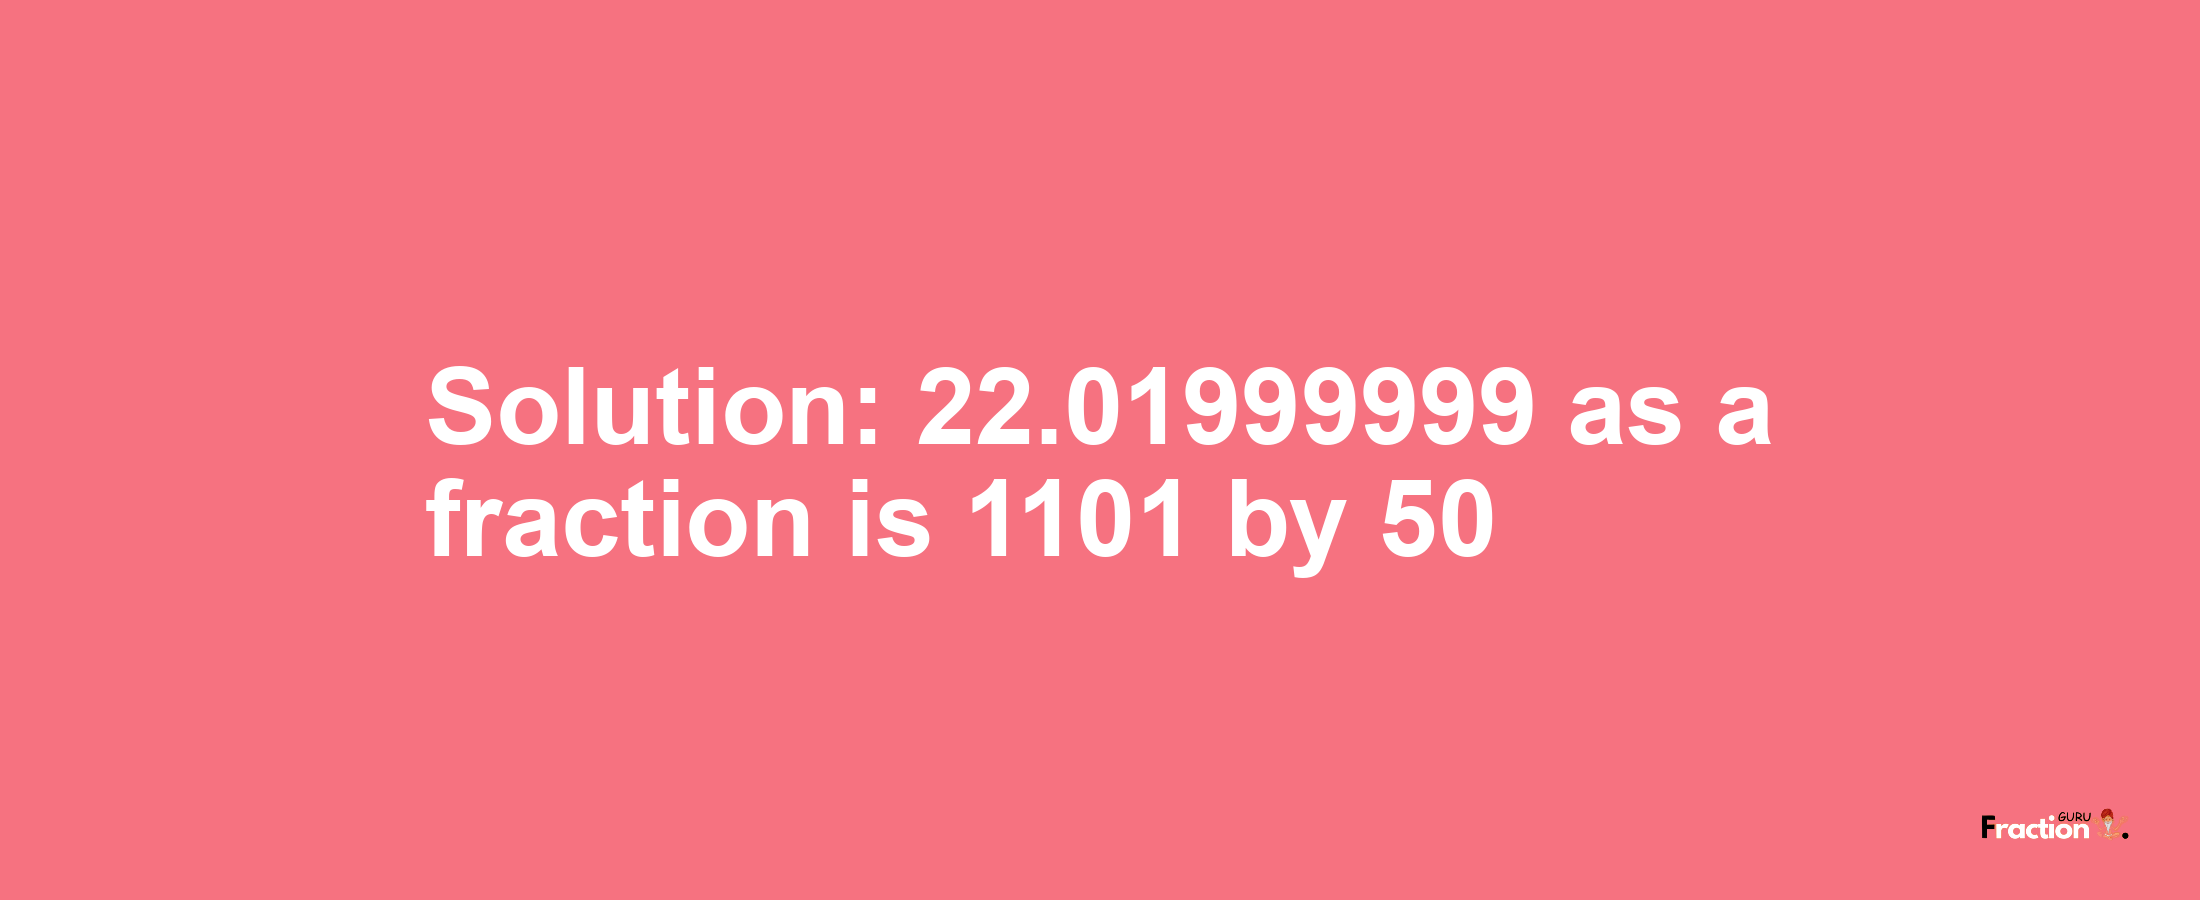 Solution:22.01999999 as a fraction is 1101/50